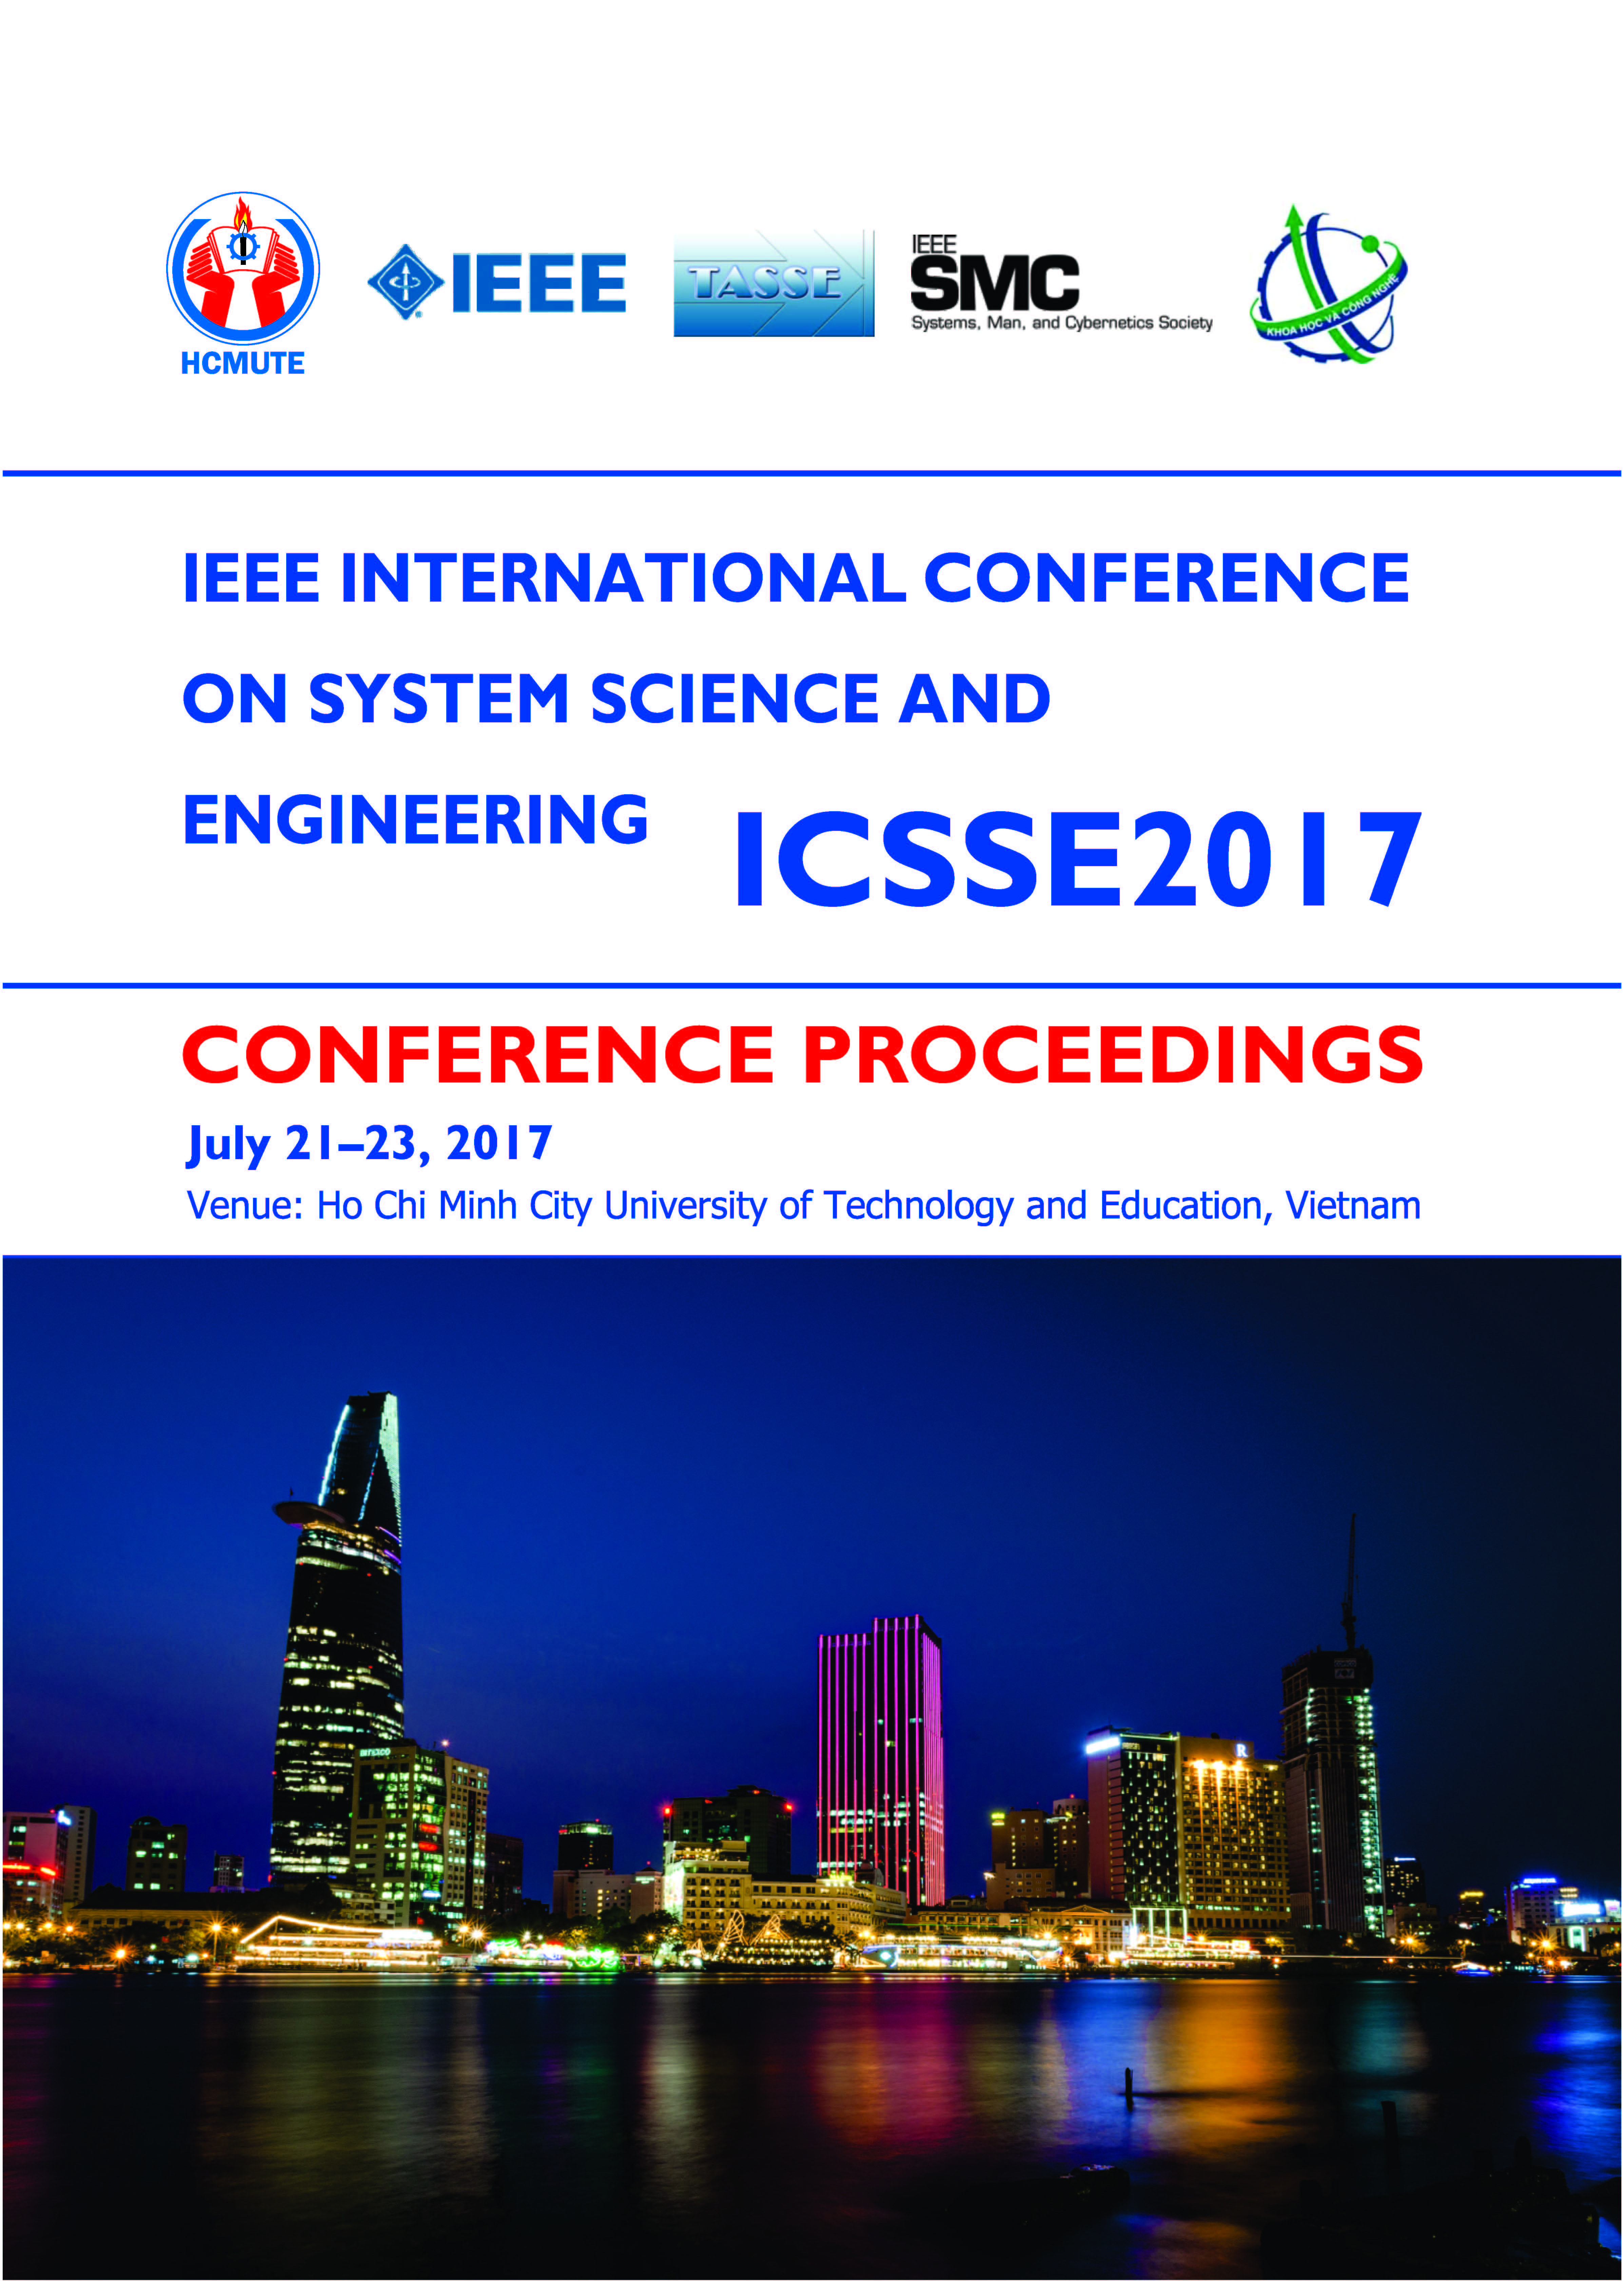 Ieee International Conference On System Science And Engineering Icsse 2017: Conference Proceedings (Kỷ yếu hội nghị quốc Tế IEEE ICSSE 2017)